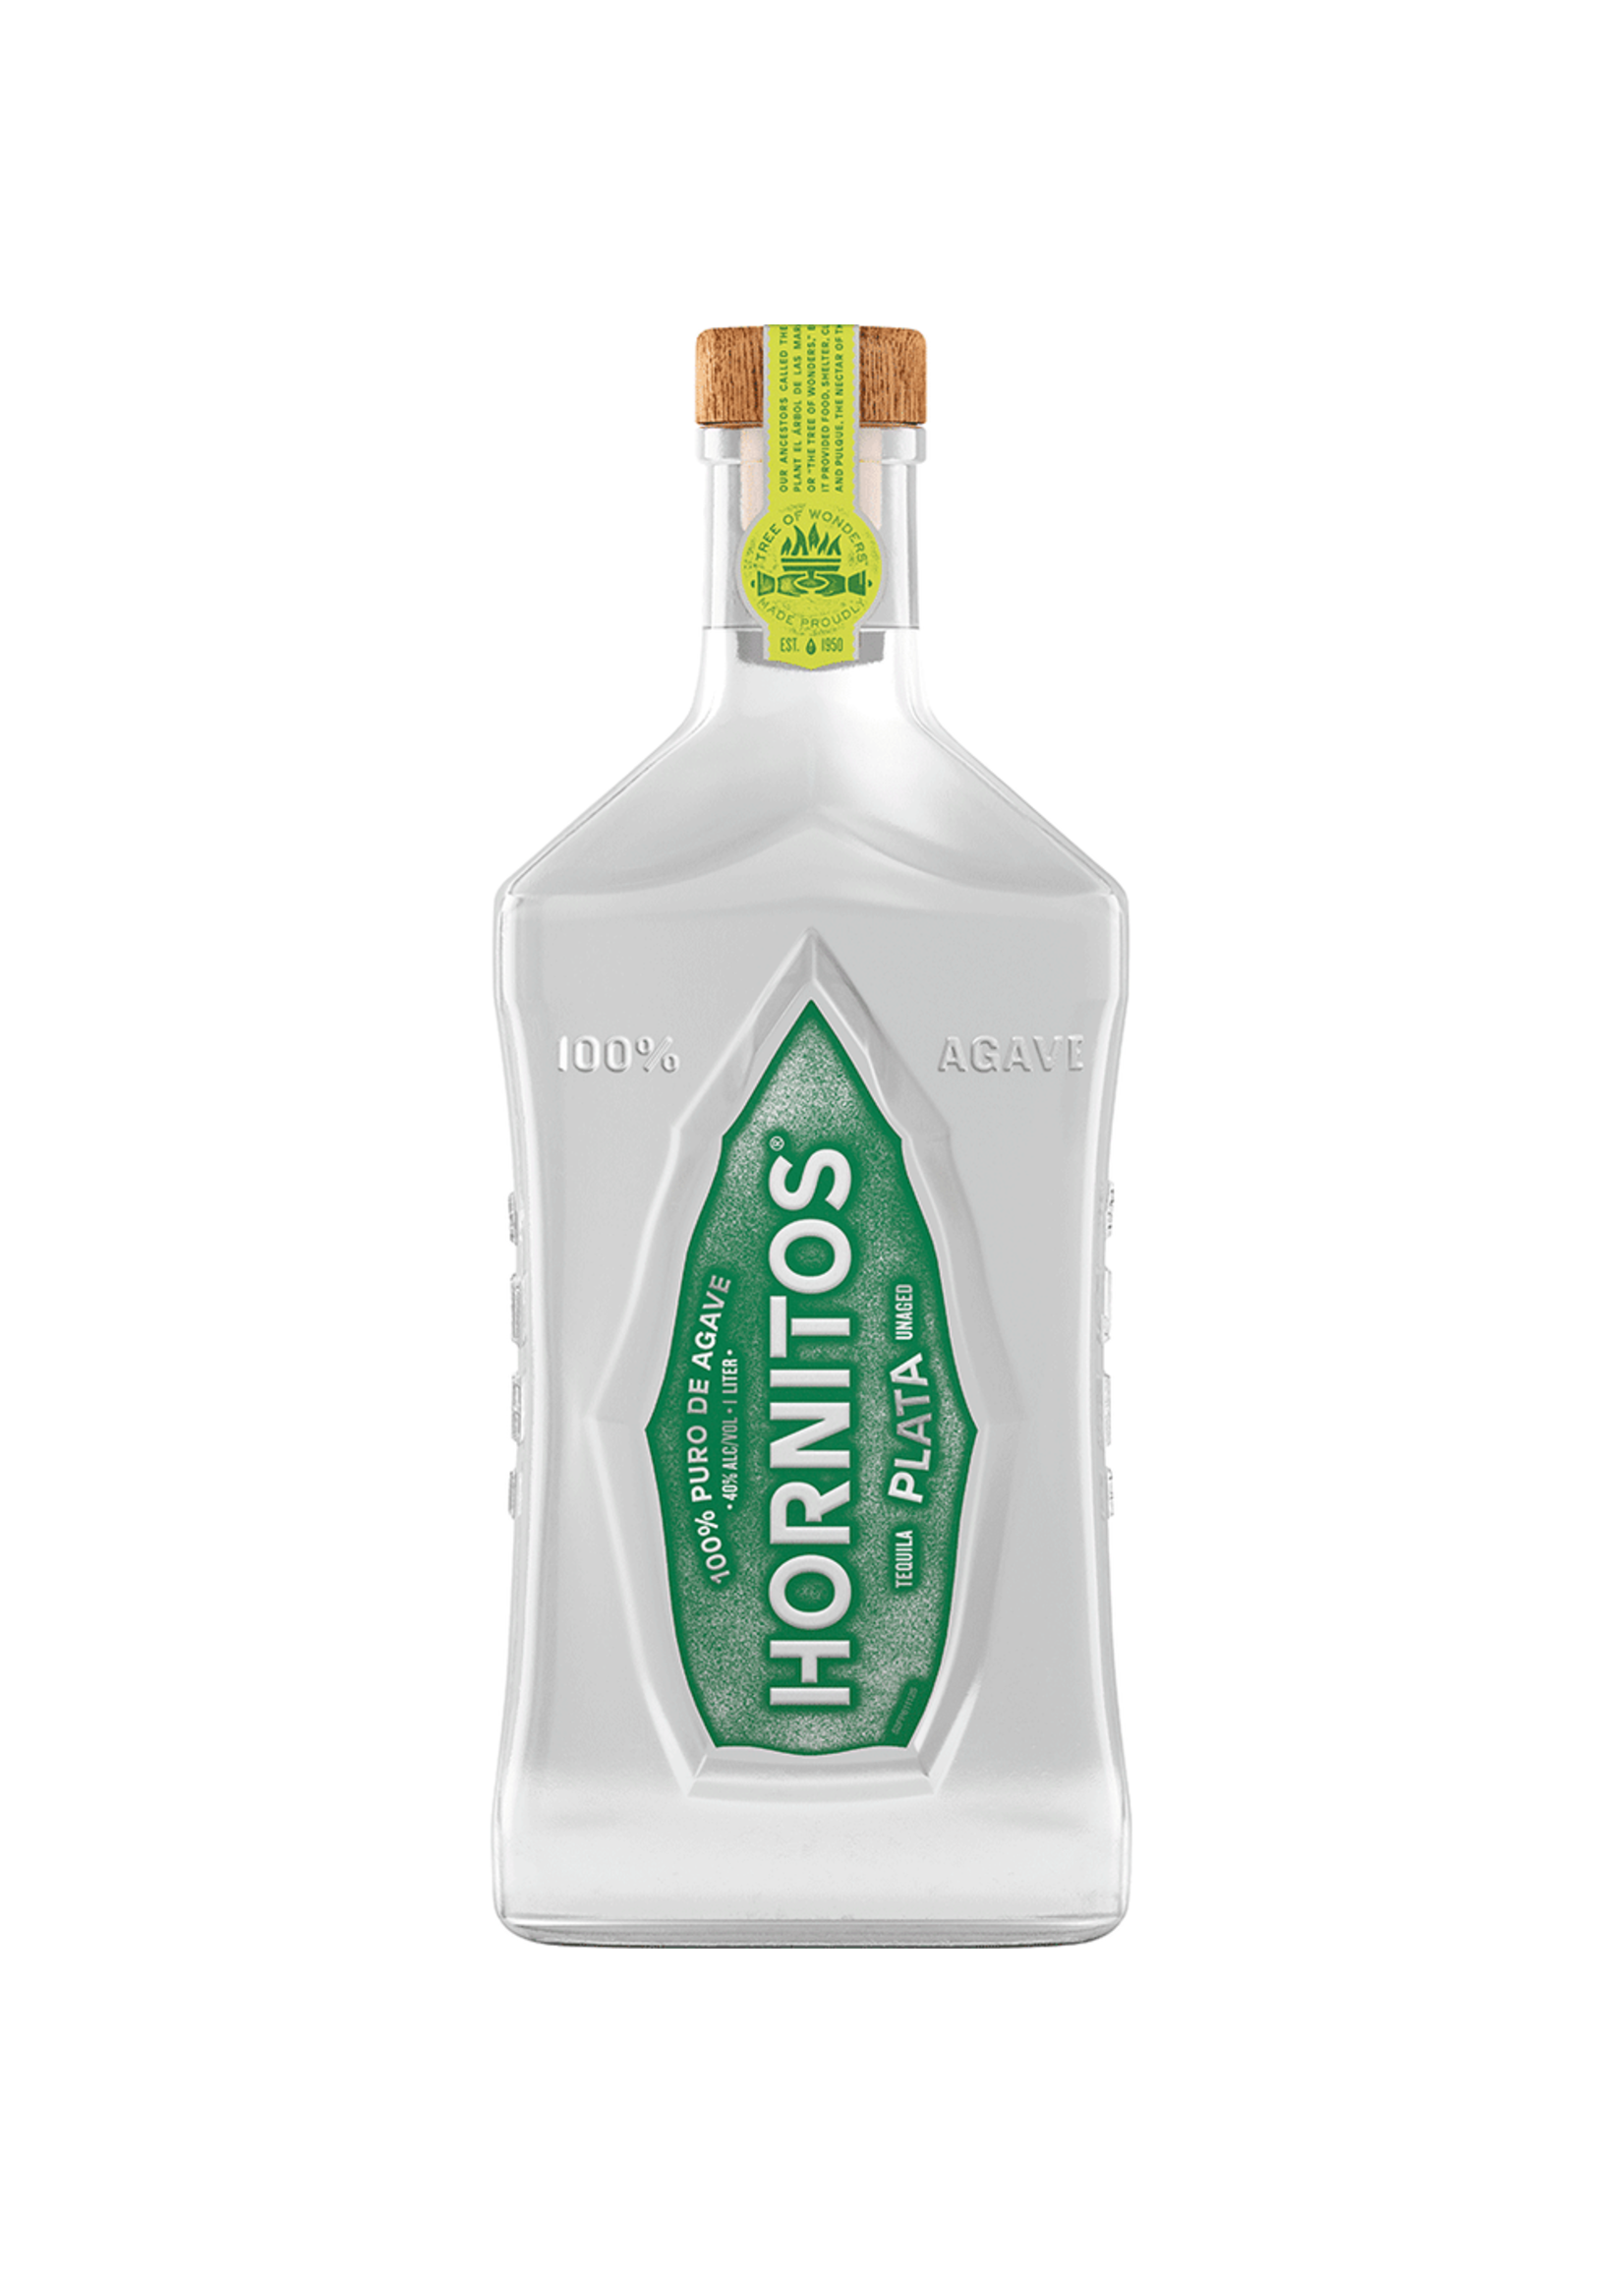 Hornitos Tequila Hornitos Plata Tequila 80Proof 1 Ltr